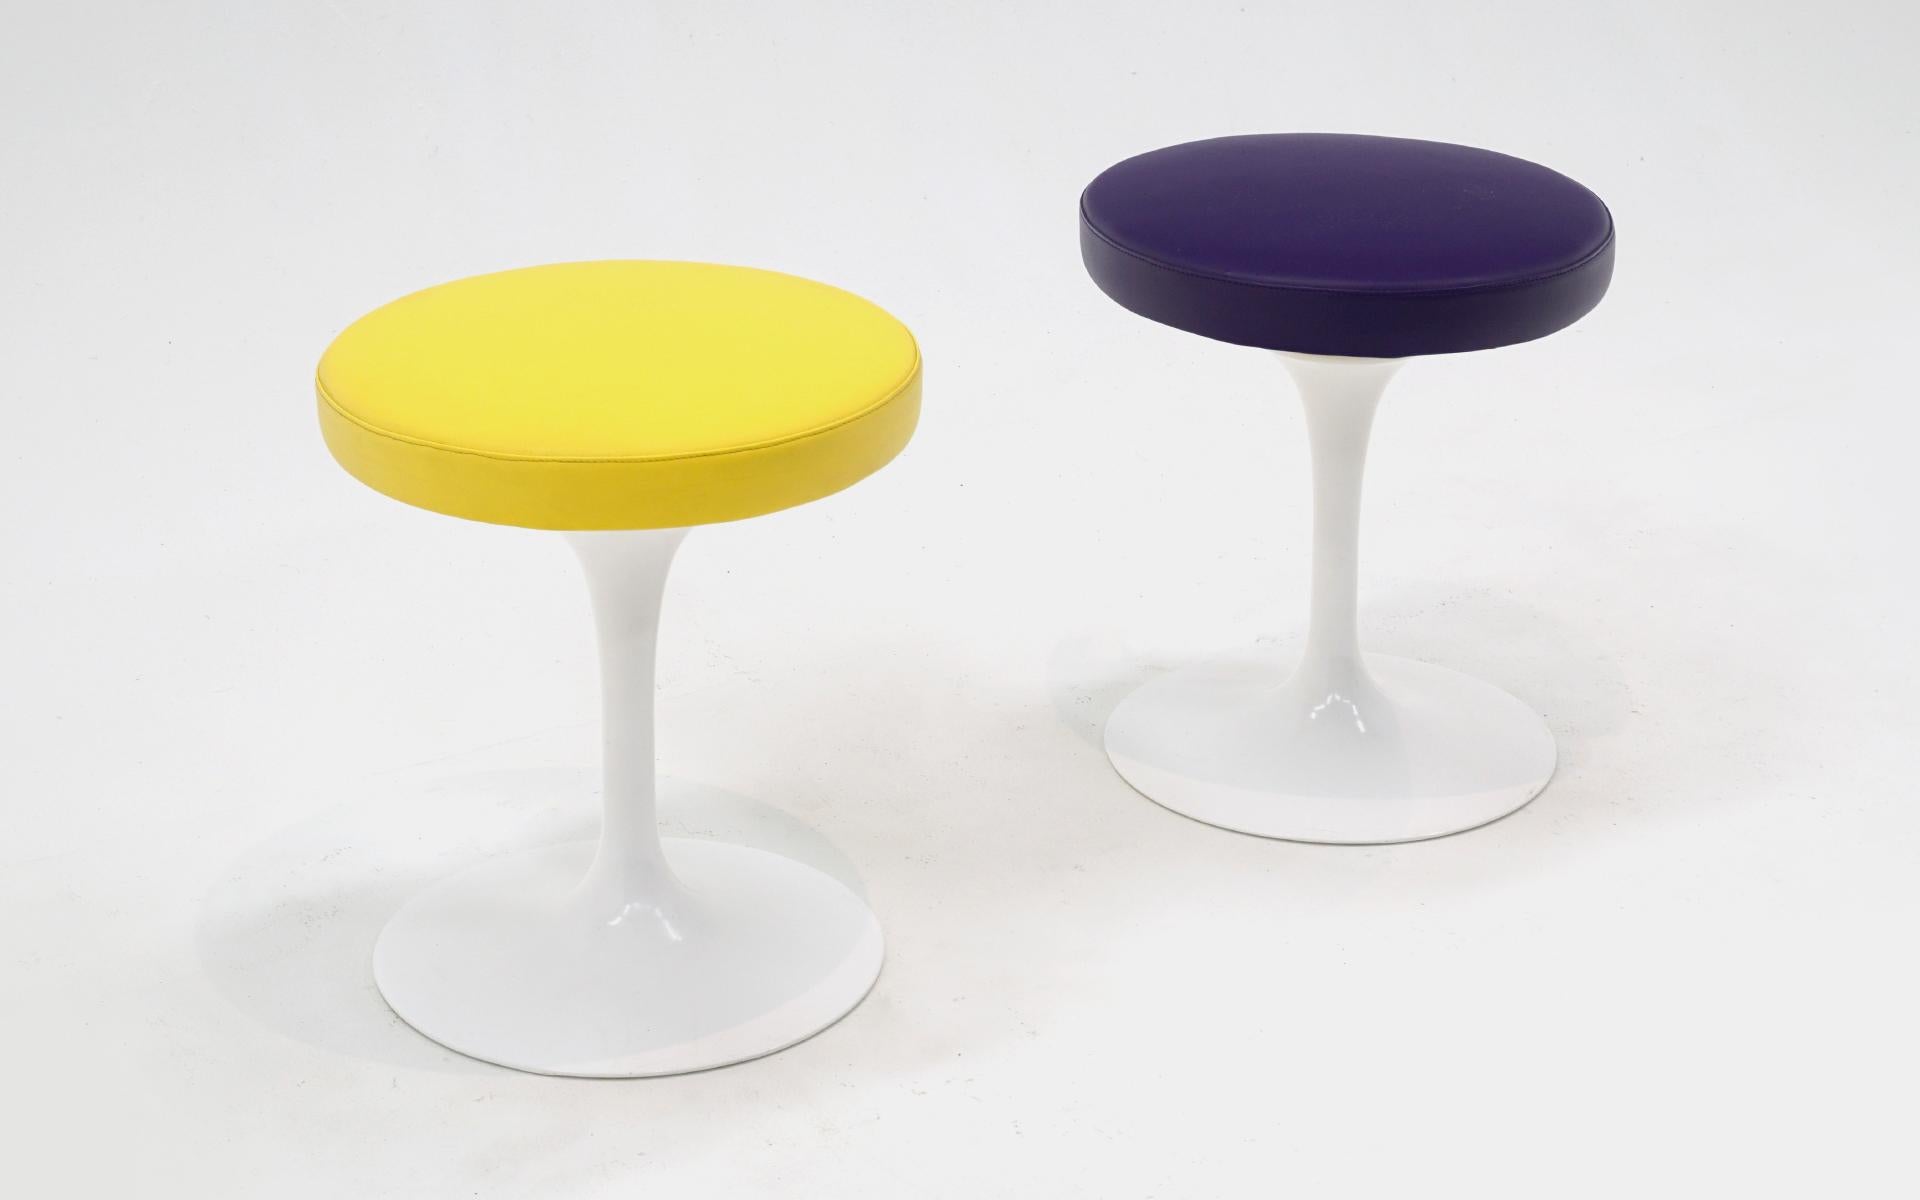 American Two Swivel Tulip Stools by Eero Saarinen for Knoll, Yellow and Purple, Signed For Sale